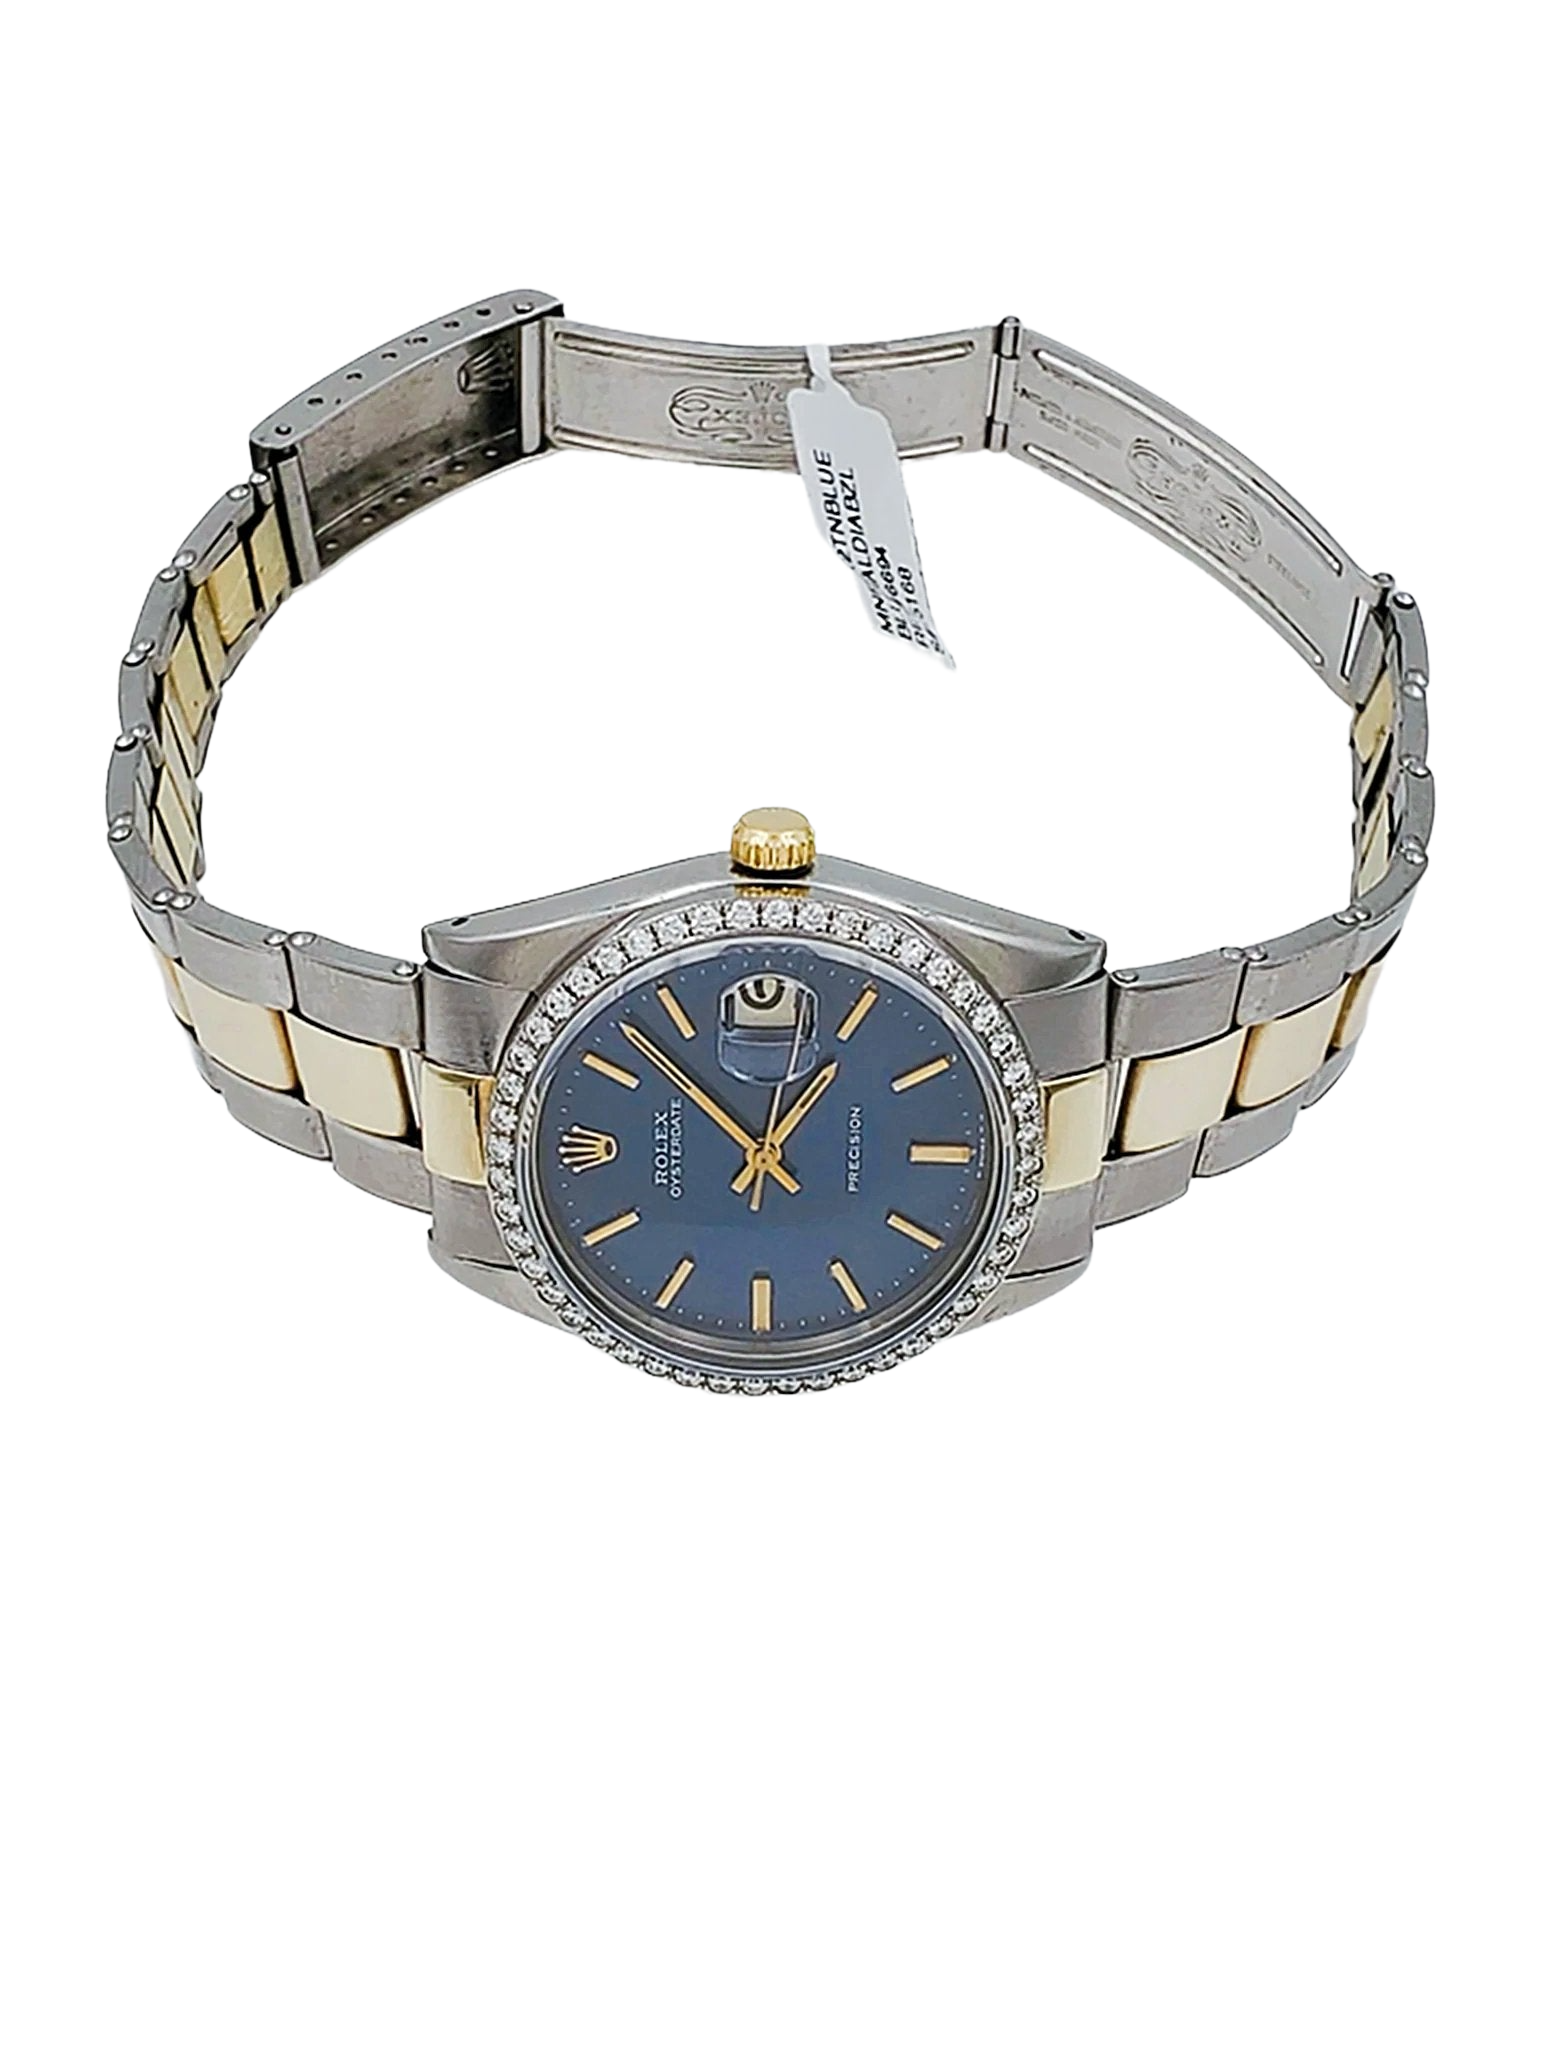 a women's watch with two tone gold and blue dials